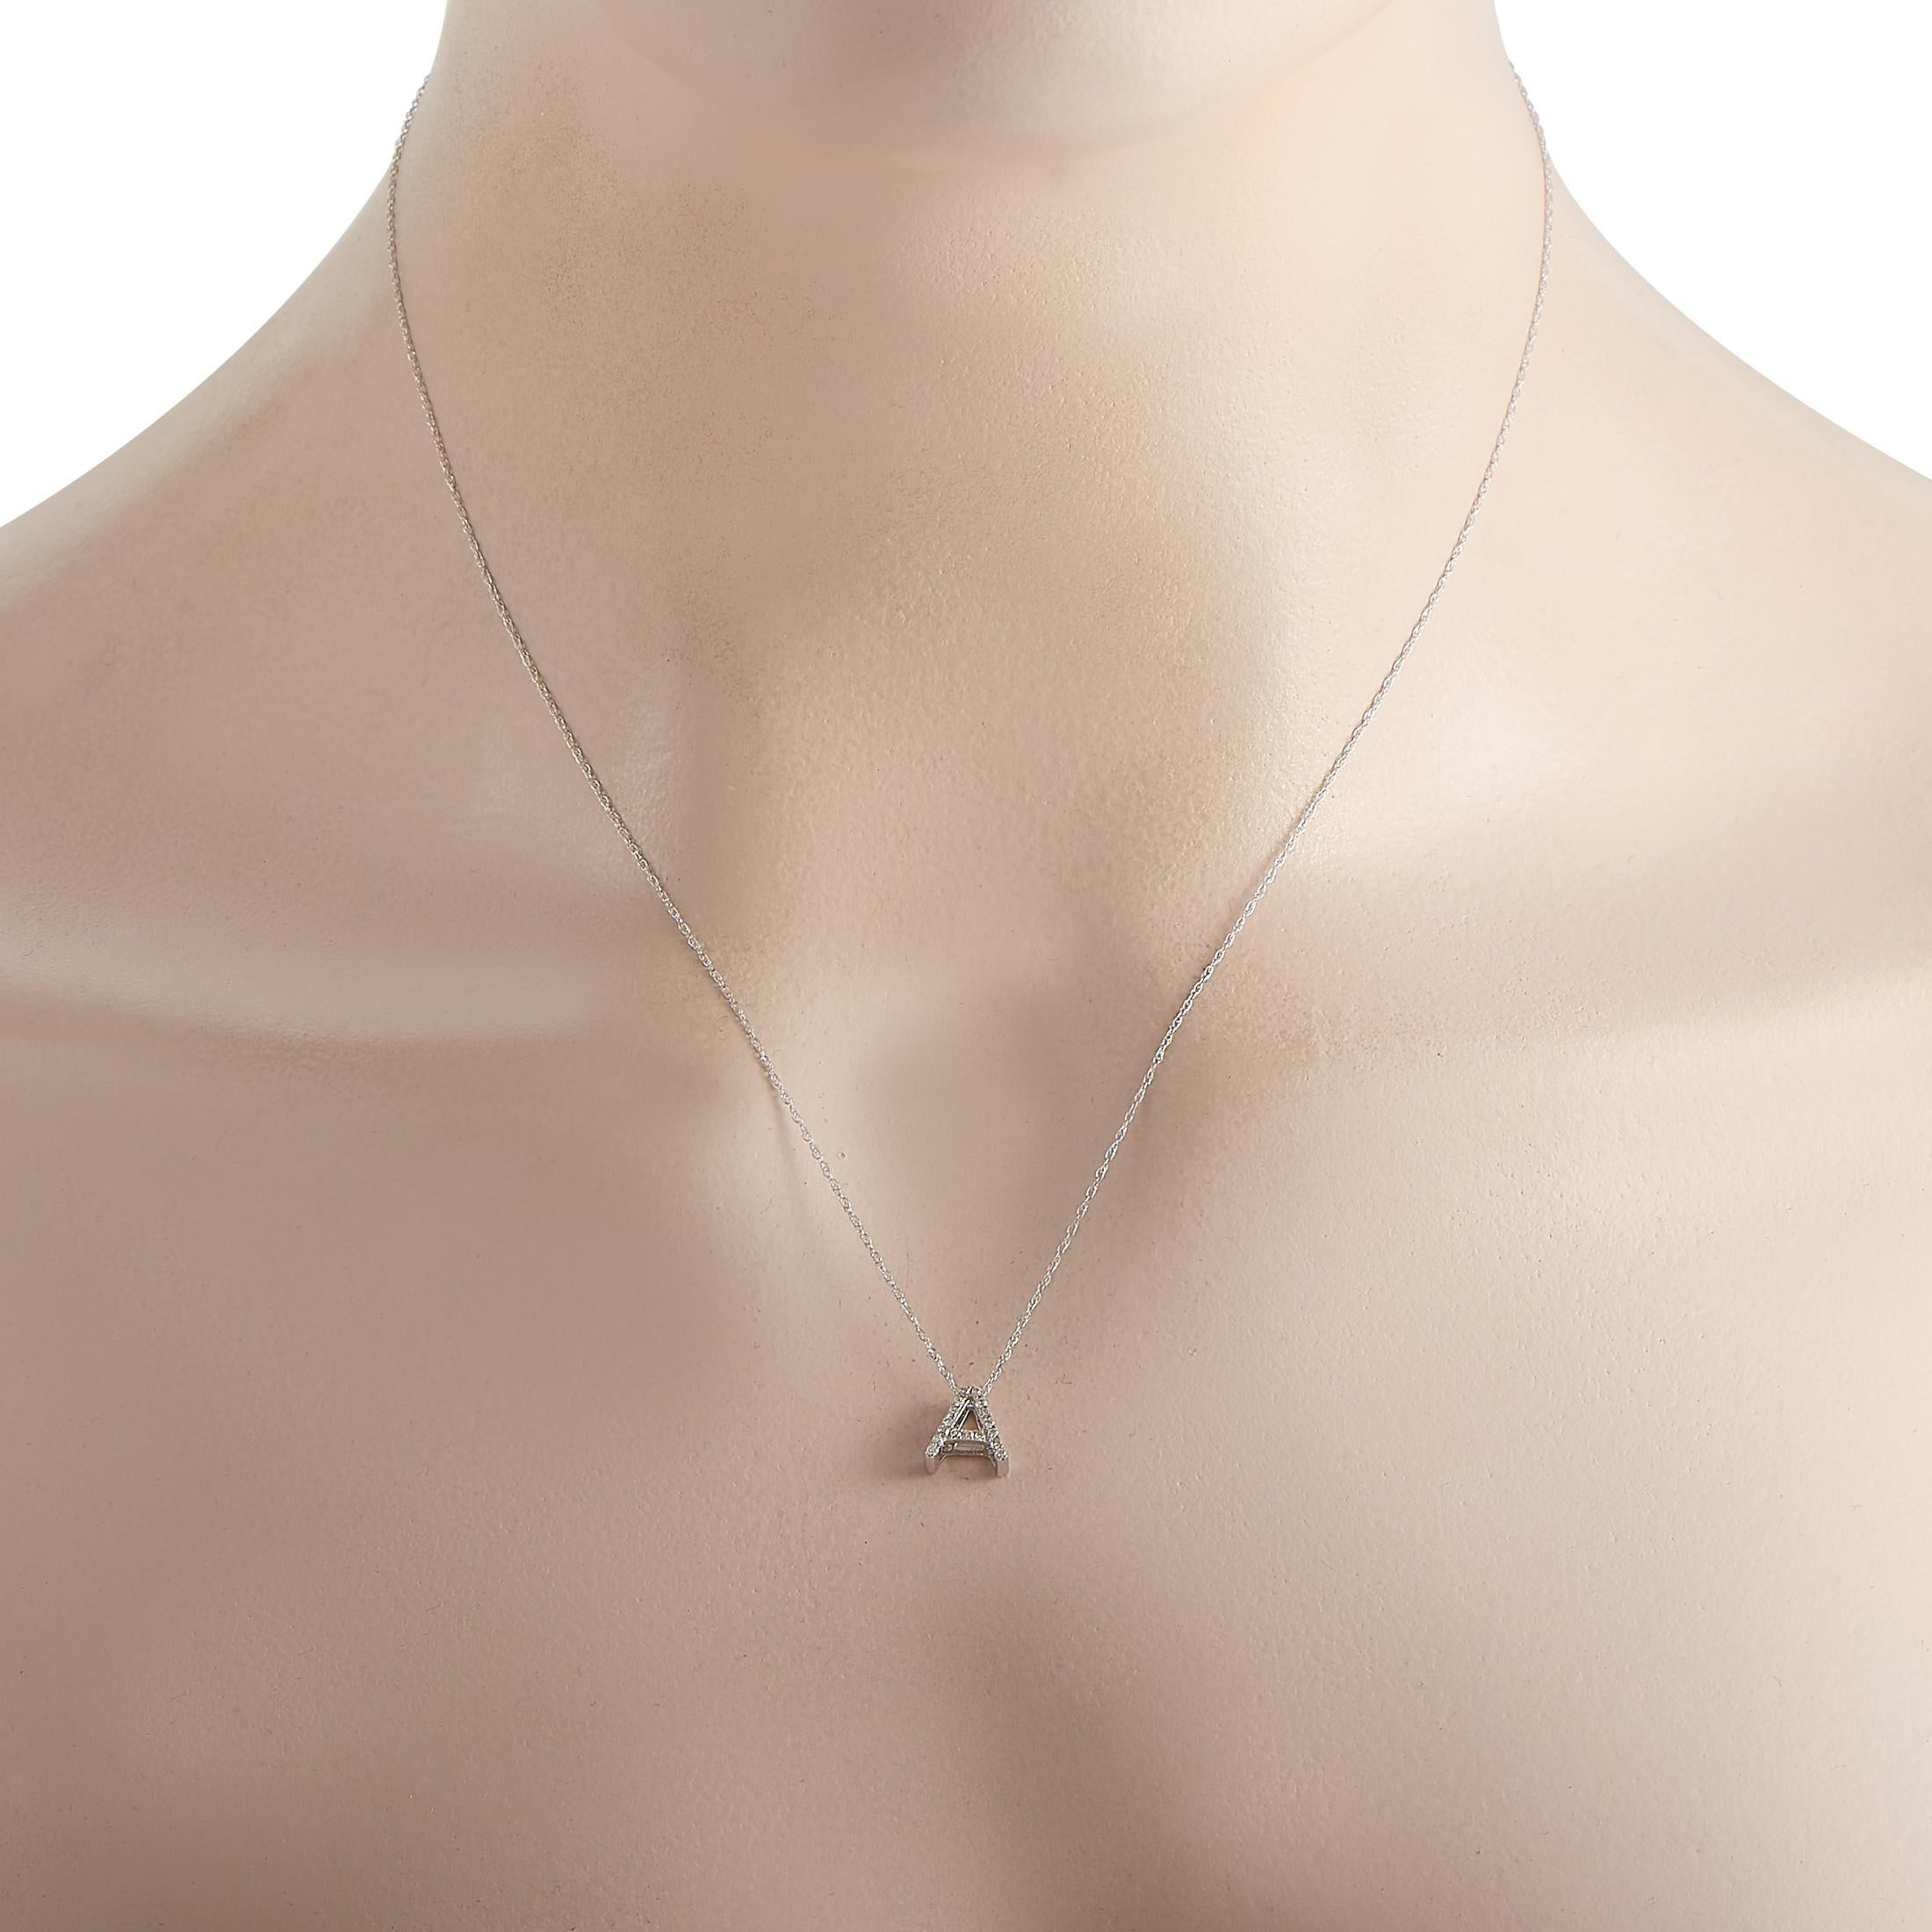 This pretty LB Exclusive 14K White Gold 0.10 ct Diamond Initial ‘A’ Necklace is made with a delicate 14K white gold chain and features a small white gold pendant shaped like the letter ‘A’ that is accompanied by 0.10 carats of pavé set diamonds. The